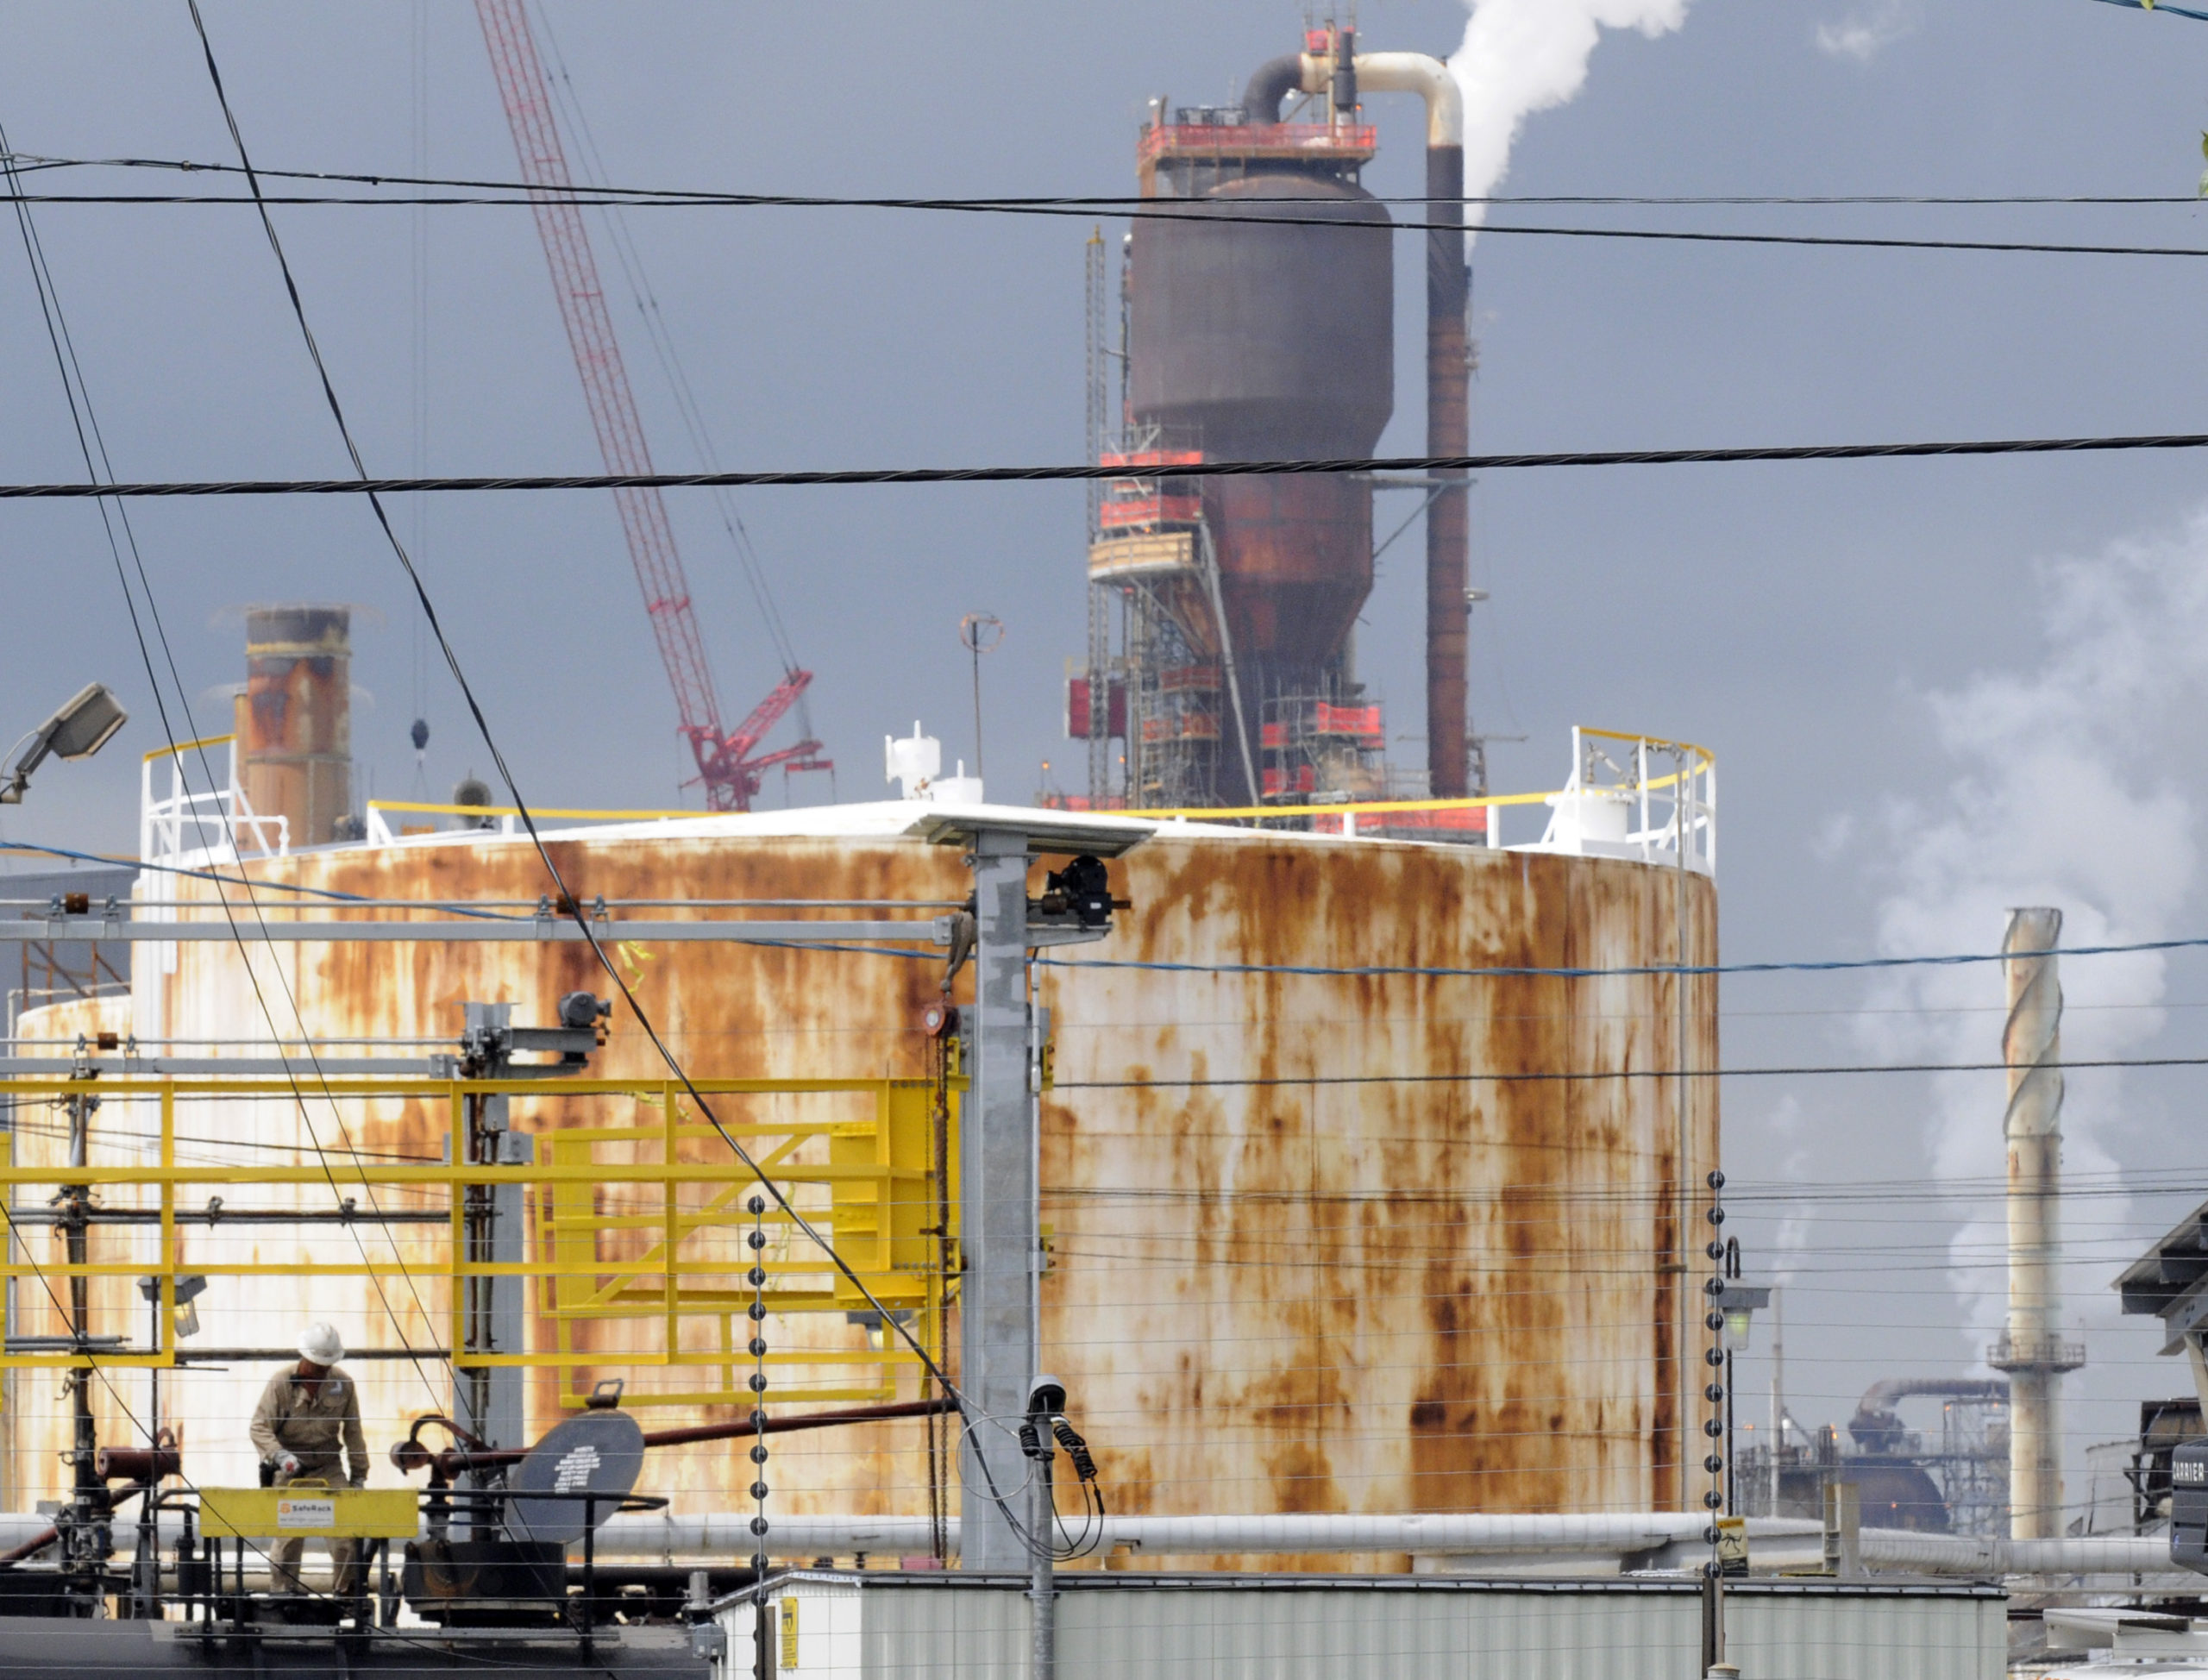 A worker can be seen in the foreground, while in the background is a chemical tank and smokestack of a refinery, with a small white plume emerging.